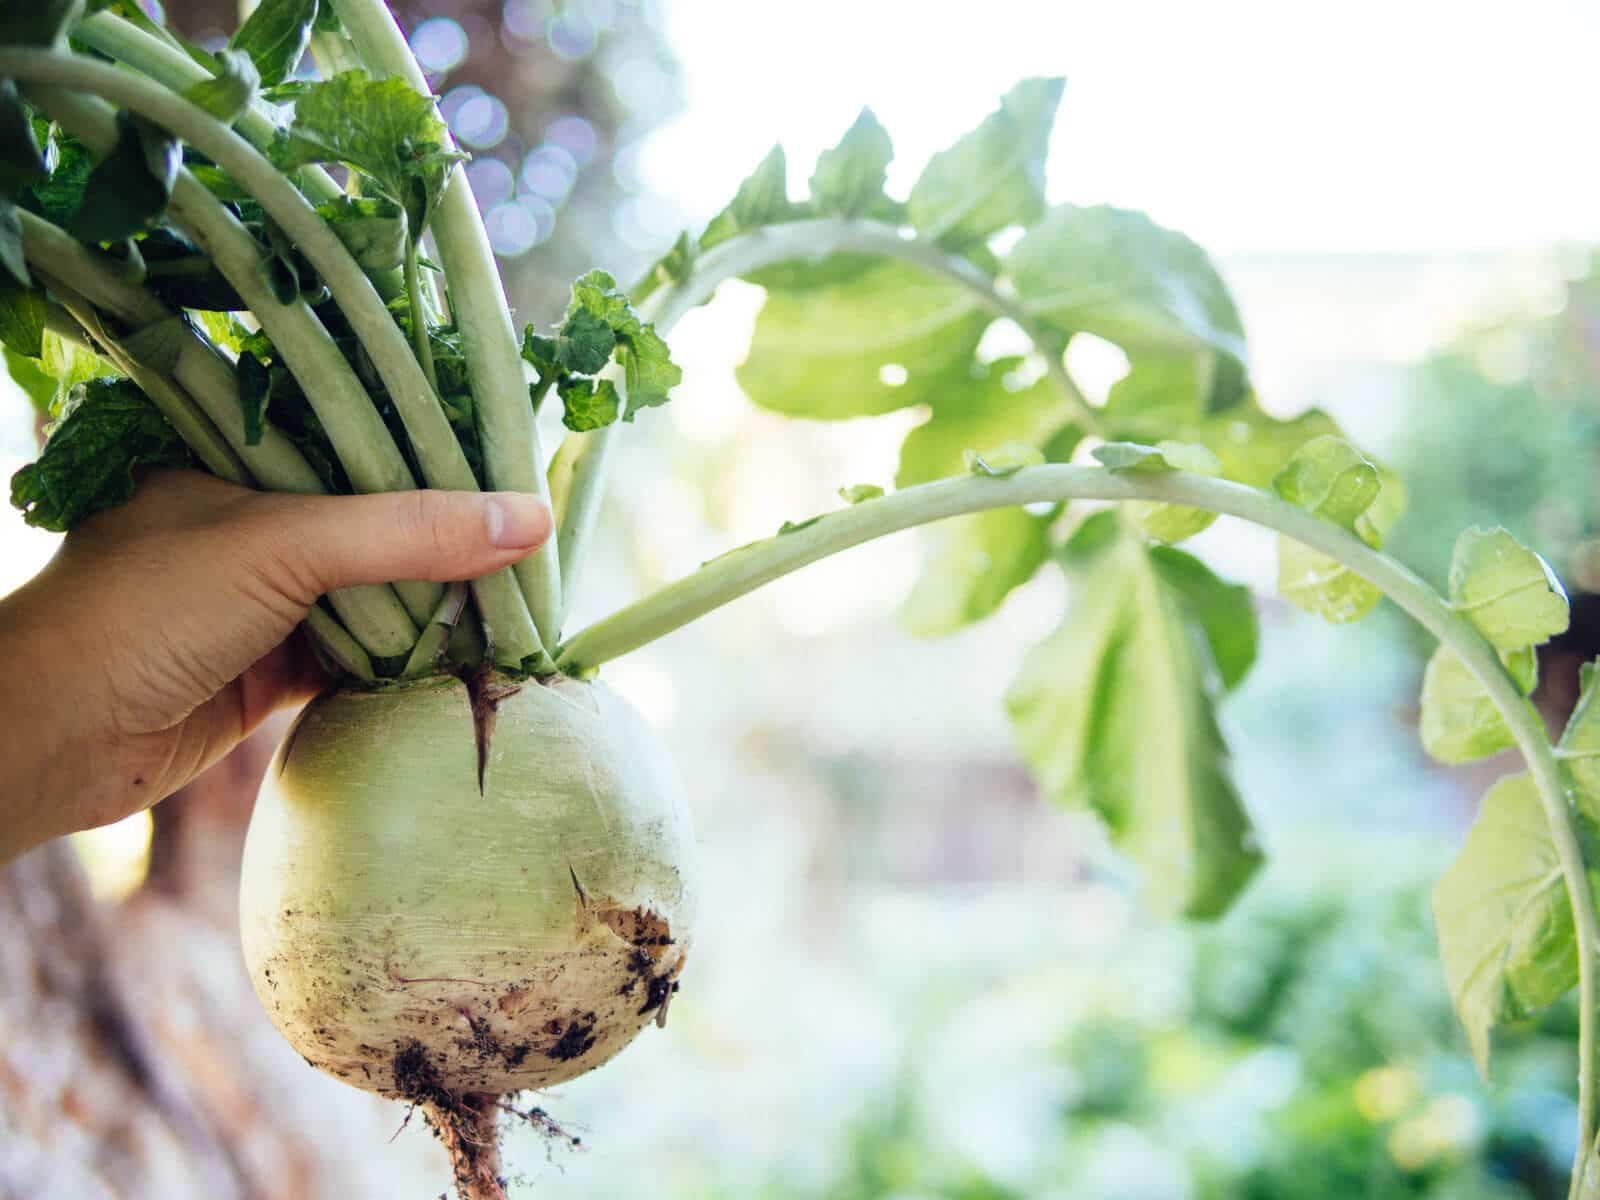 Winter radish is shallow-rooted